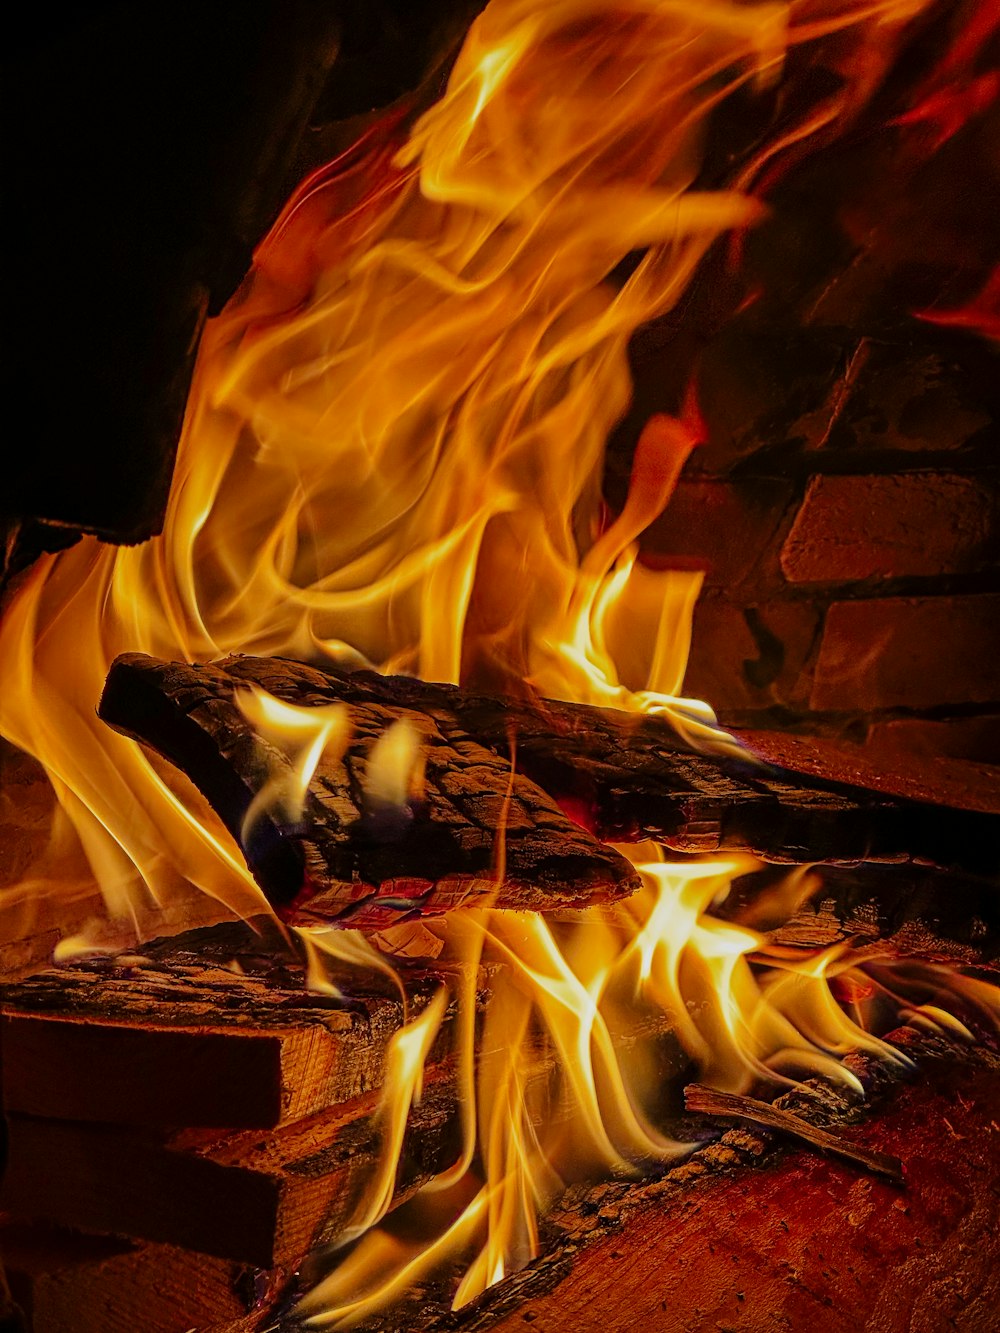 a fire burning in a fireplace with lots of flames